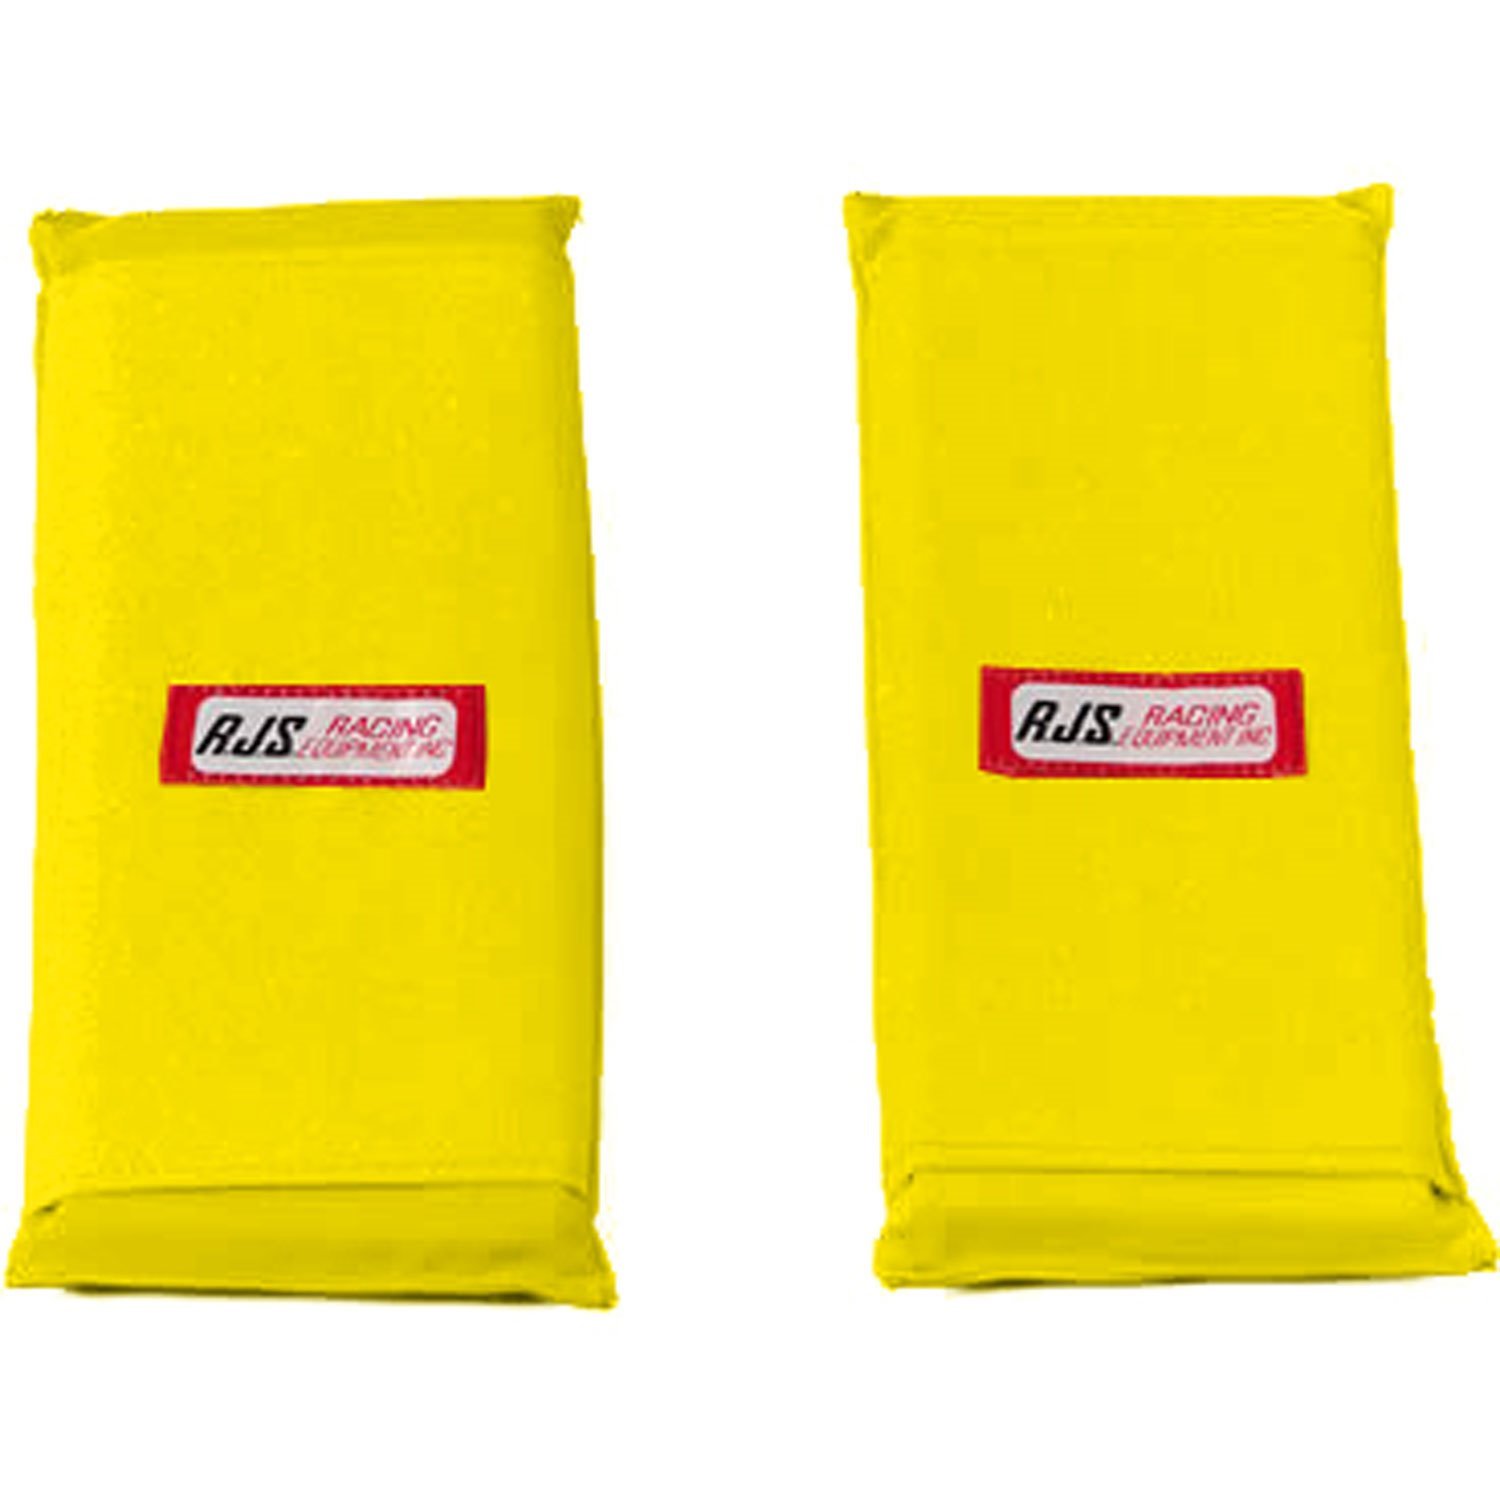 RJS Yellow Safety Harness Pads